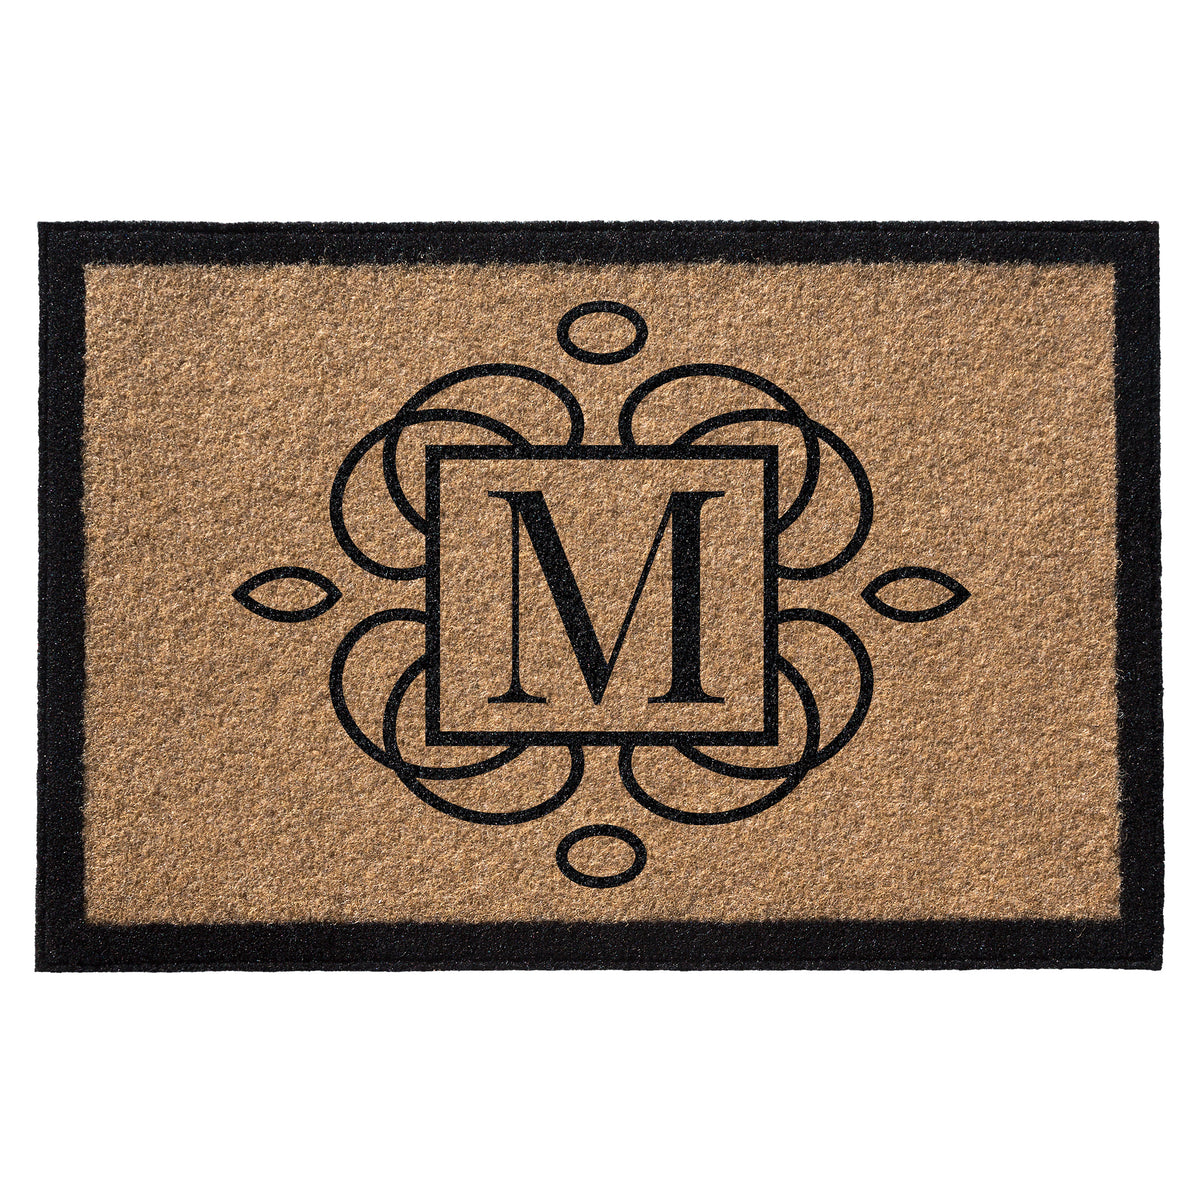 Infinity Custom Mats™ All-Weather Personalized Door Mat - STYLE: Floral Monogram COLOR: TAN - rugsthatfit.com